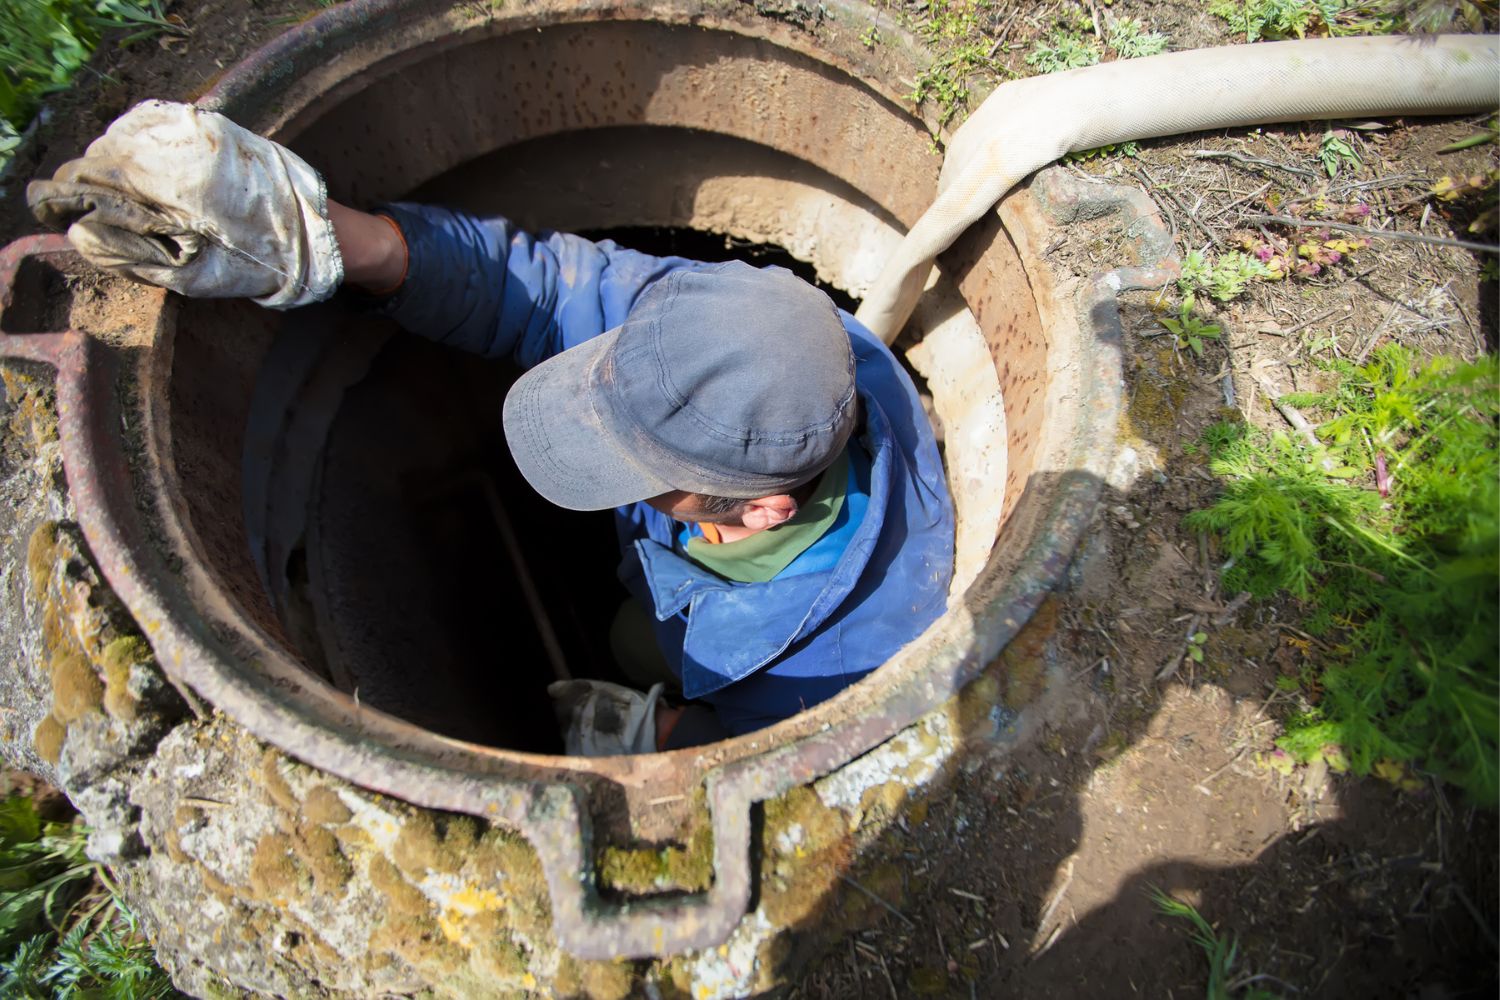 A worker descends into a large drain.